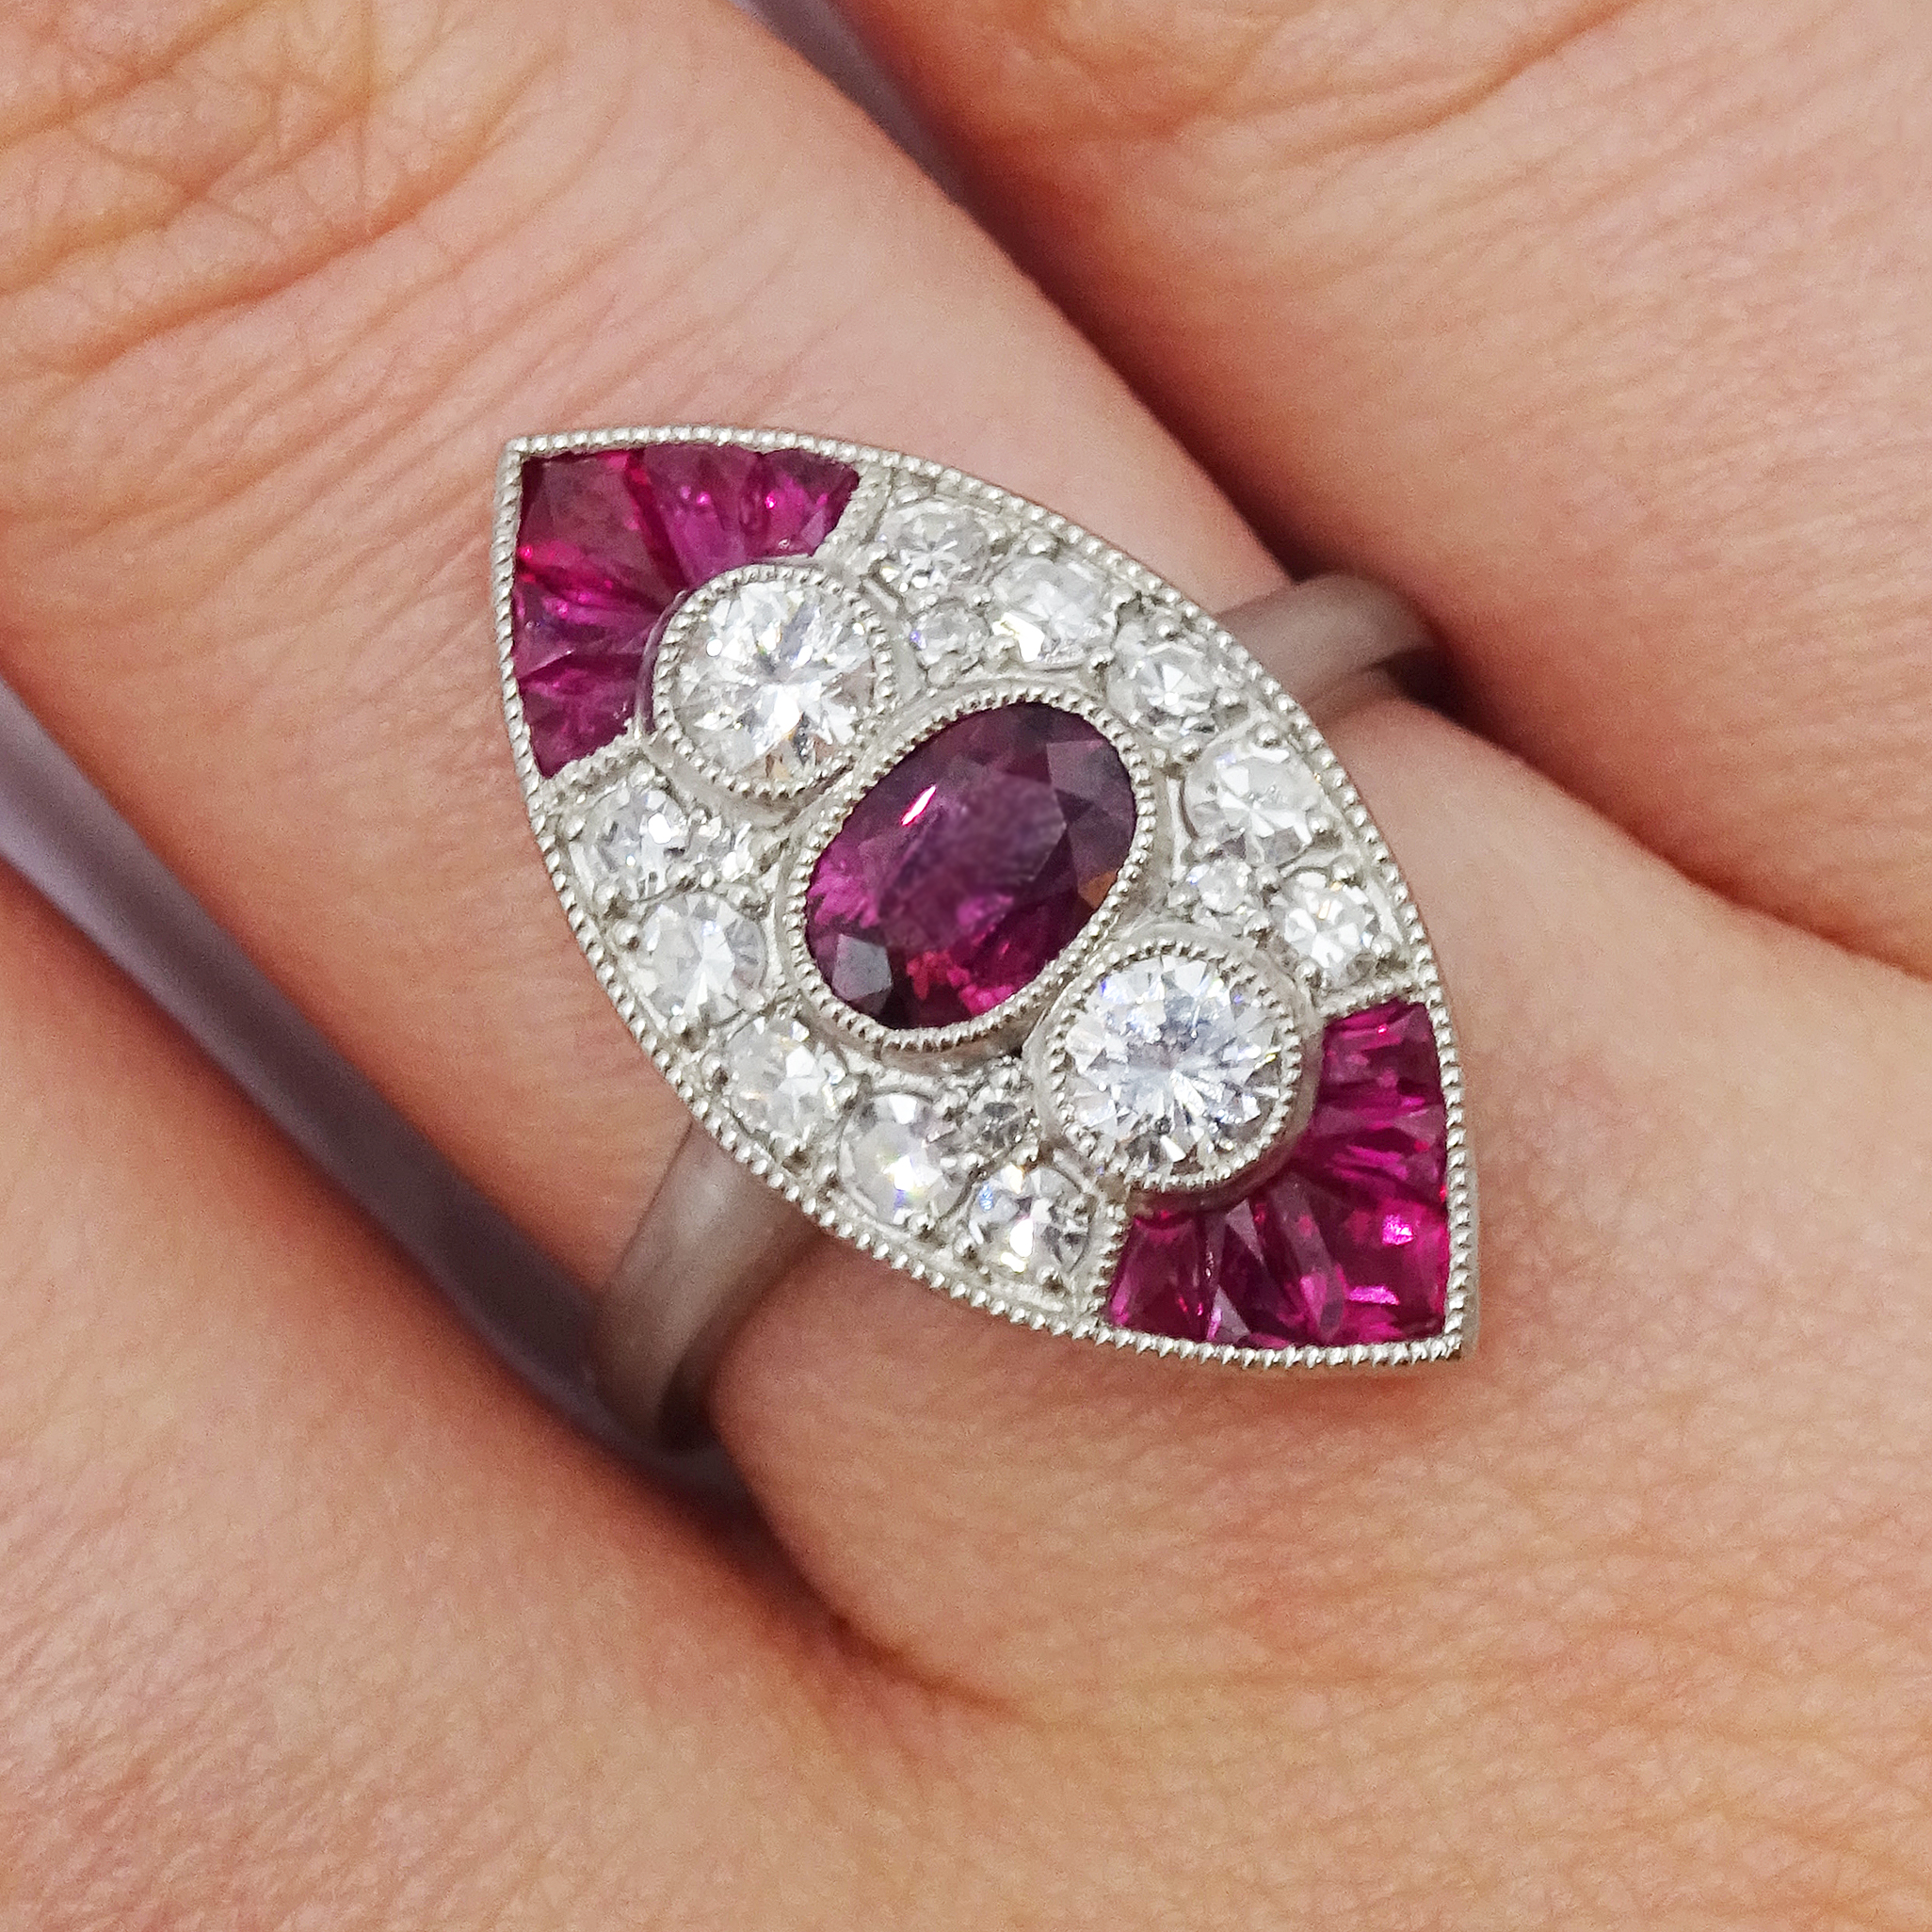 Victorian style marquise shaped platinum ring set with rubies and diamonds - Image 2 of 6